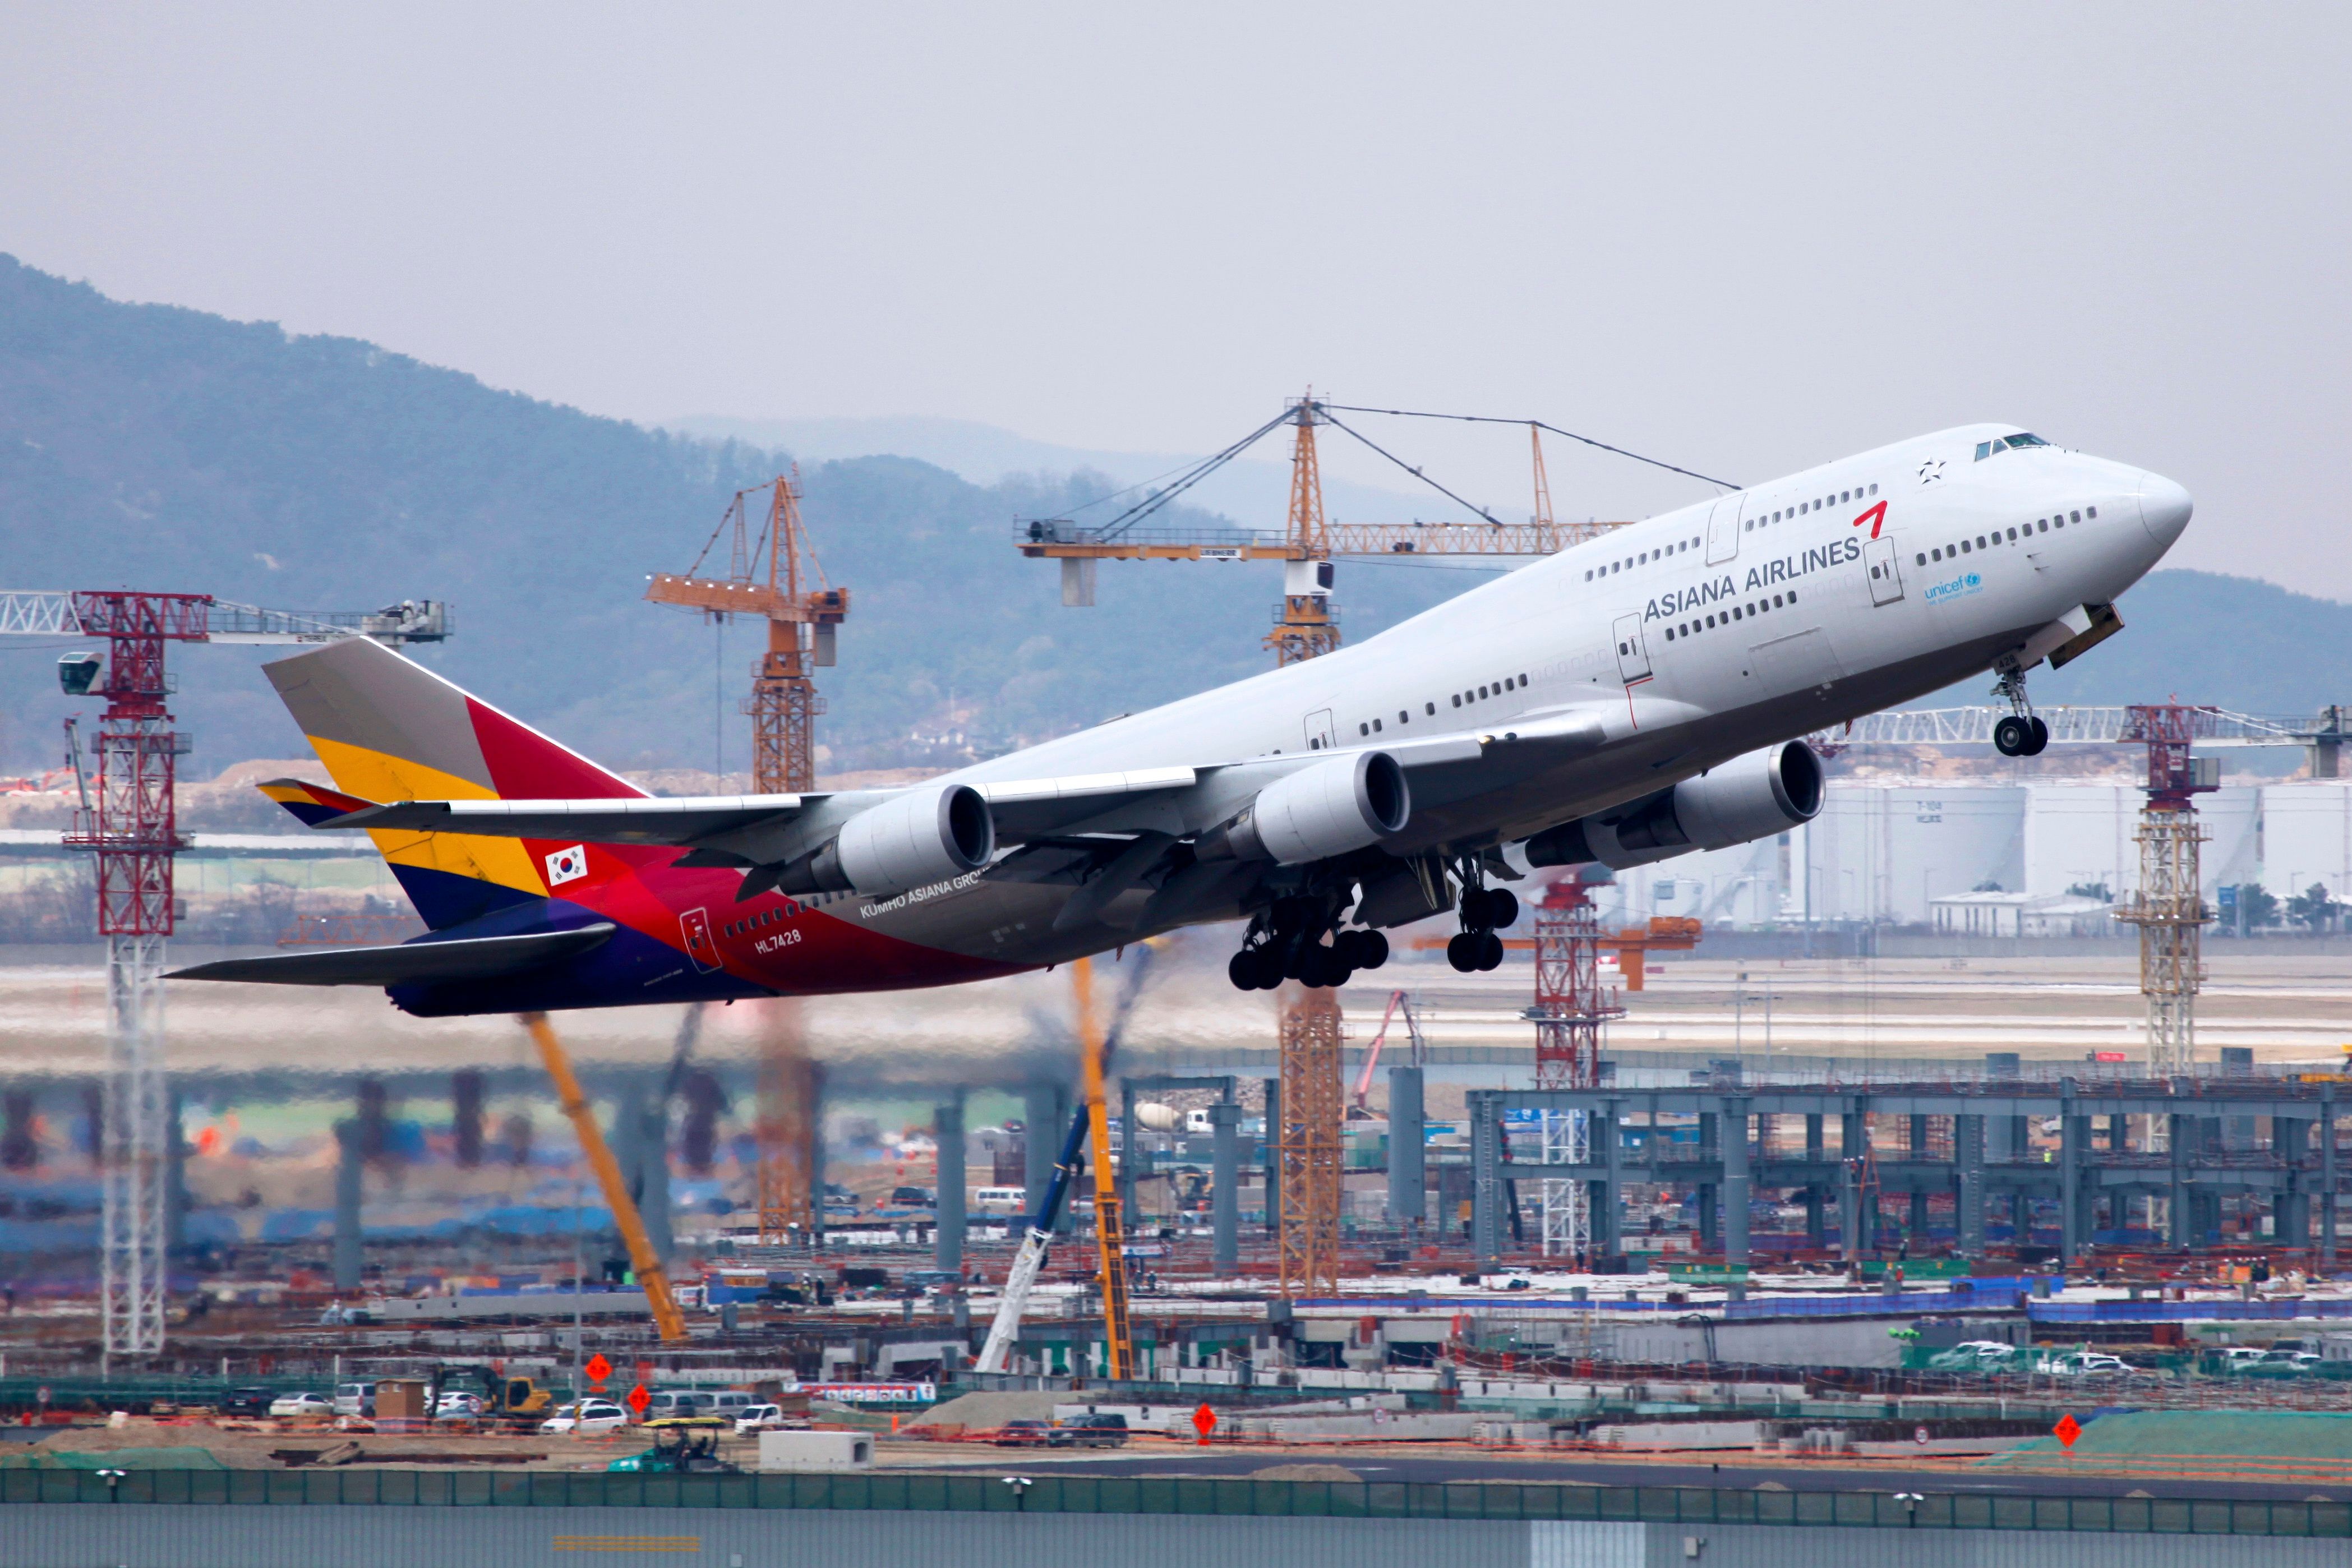 Asiana 747-400 HL7428 taking off